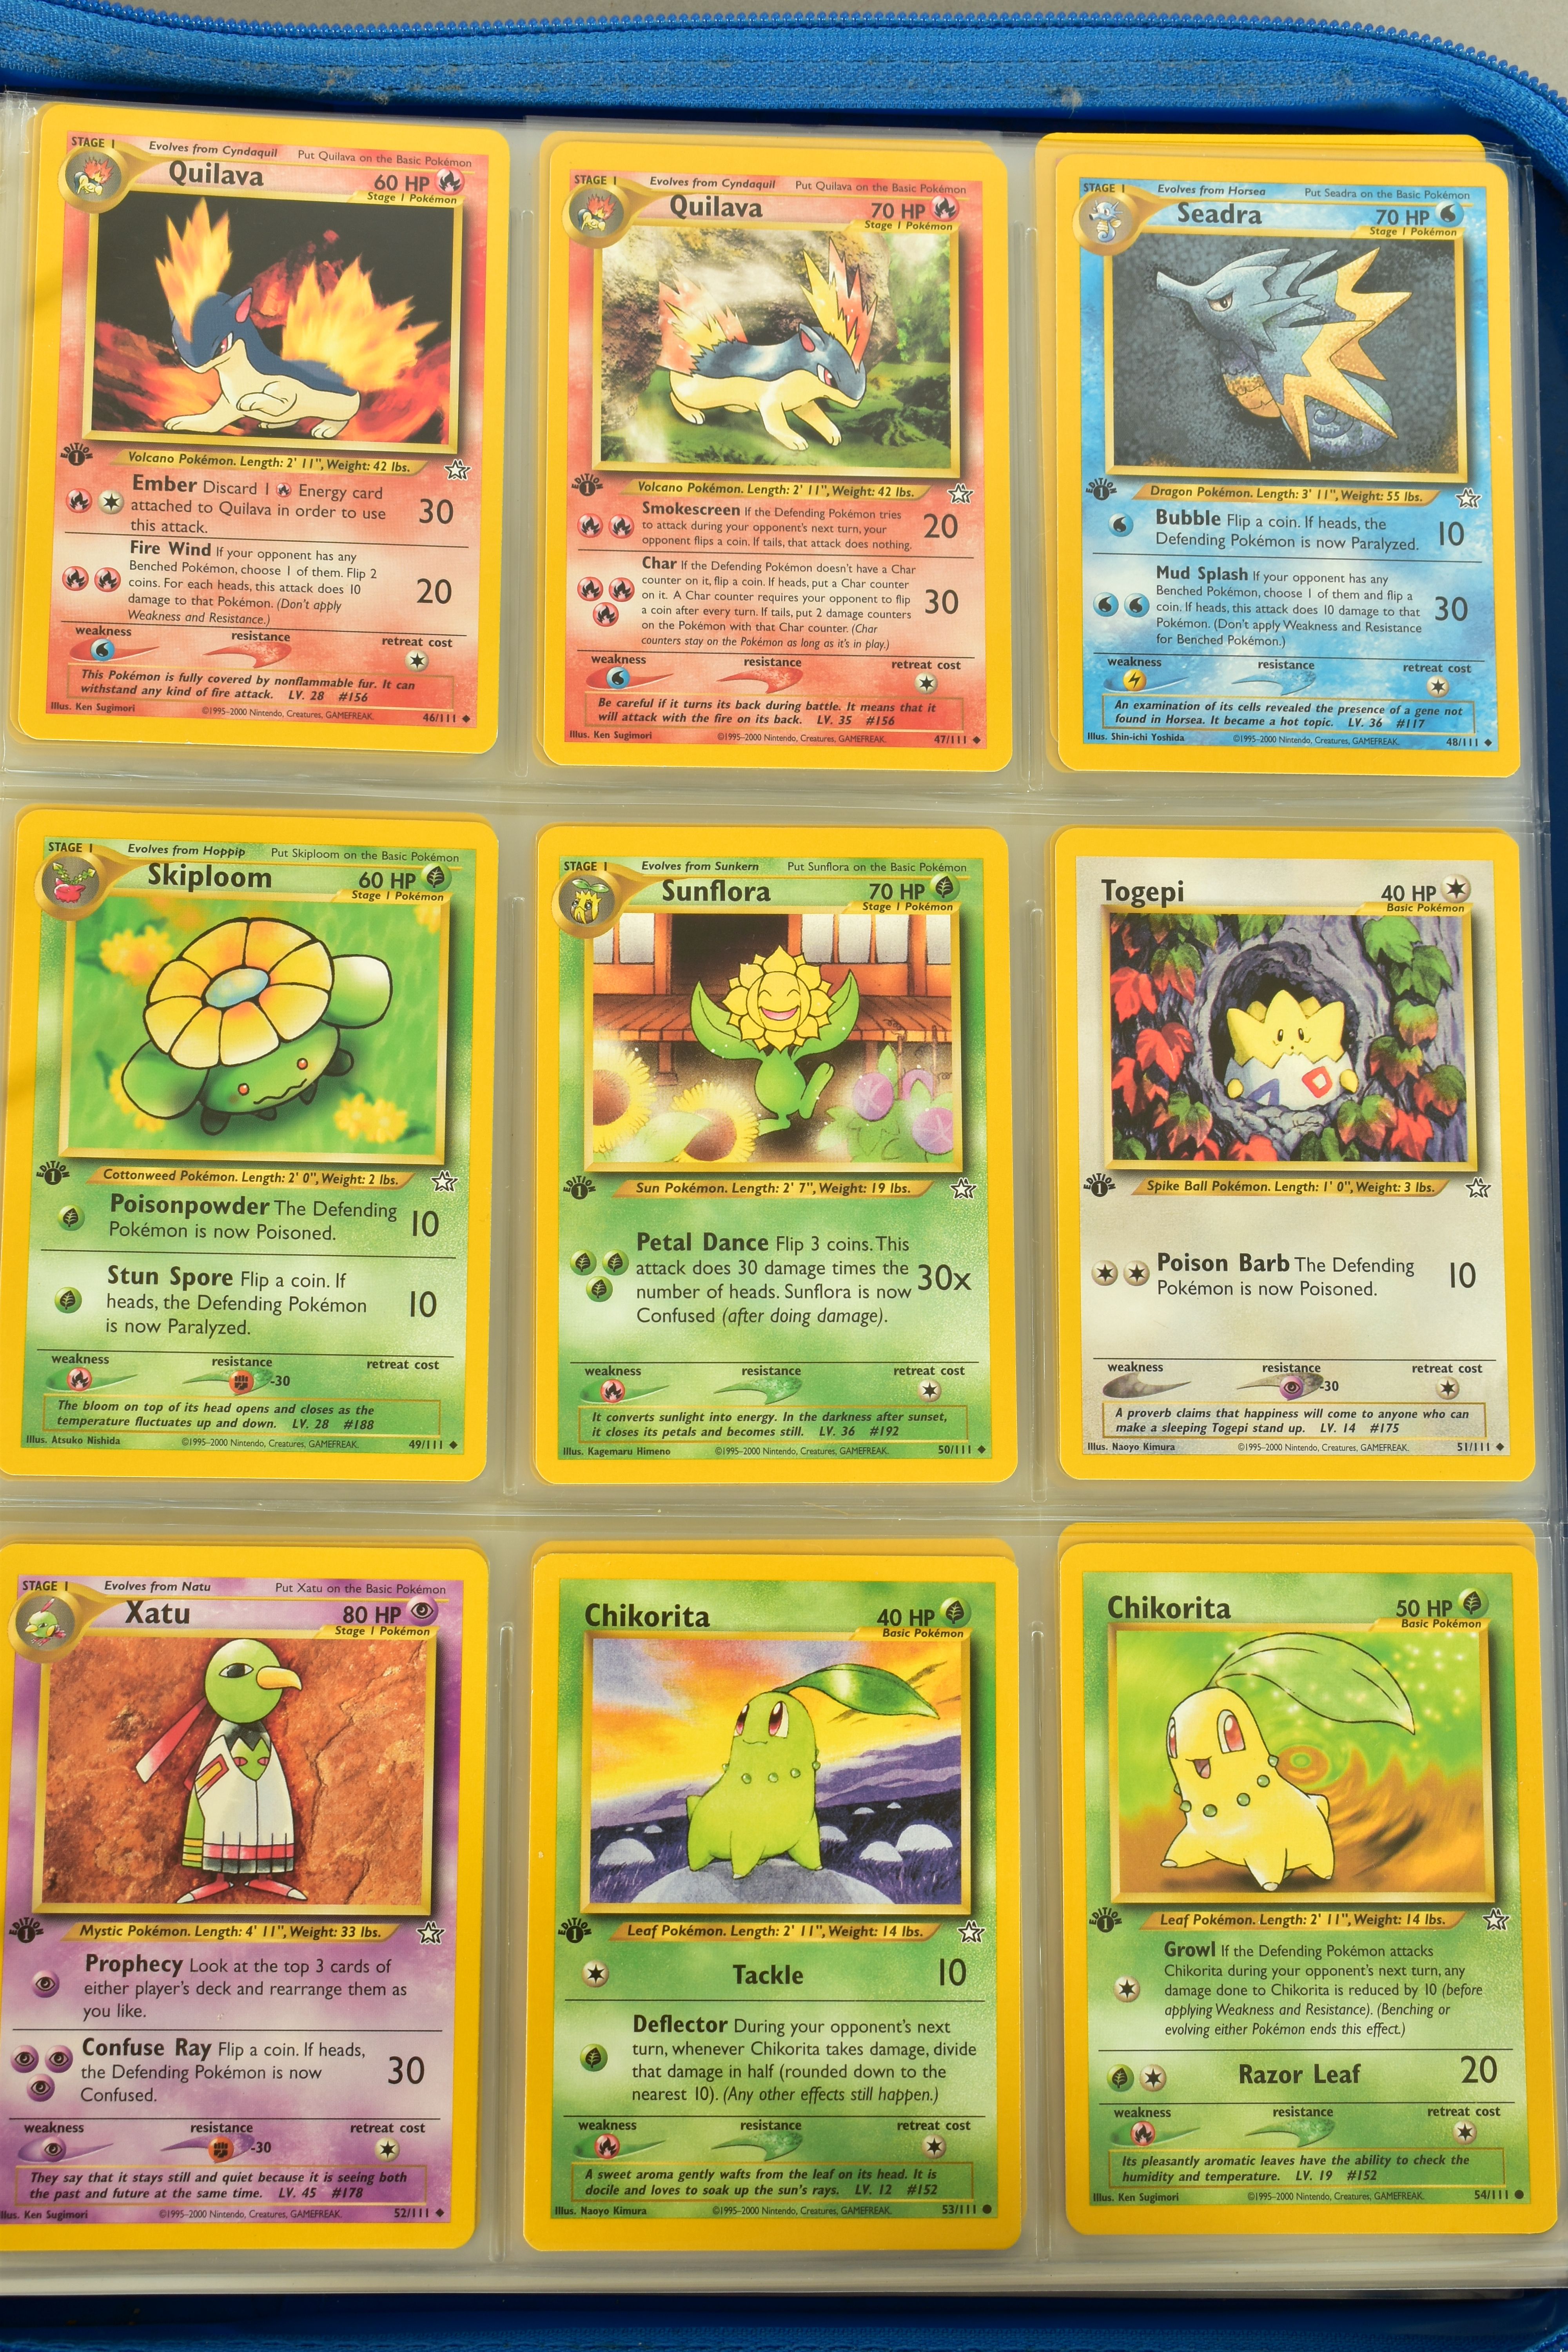 THE COMPLETE POKEMON CARD NEO GENESIS AND NEO DISCOVERY SETS, containing many first edition cards. - Image 11 of 32